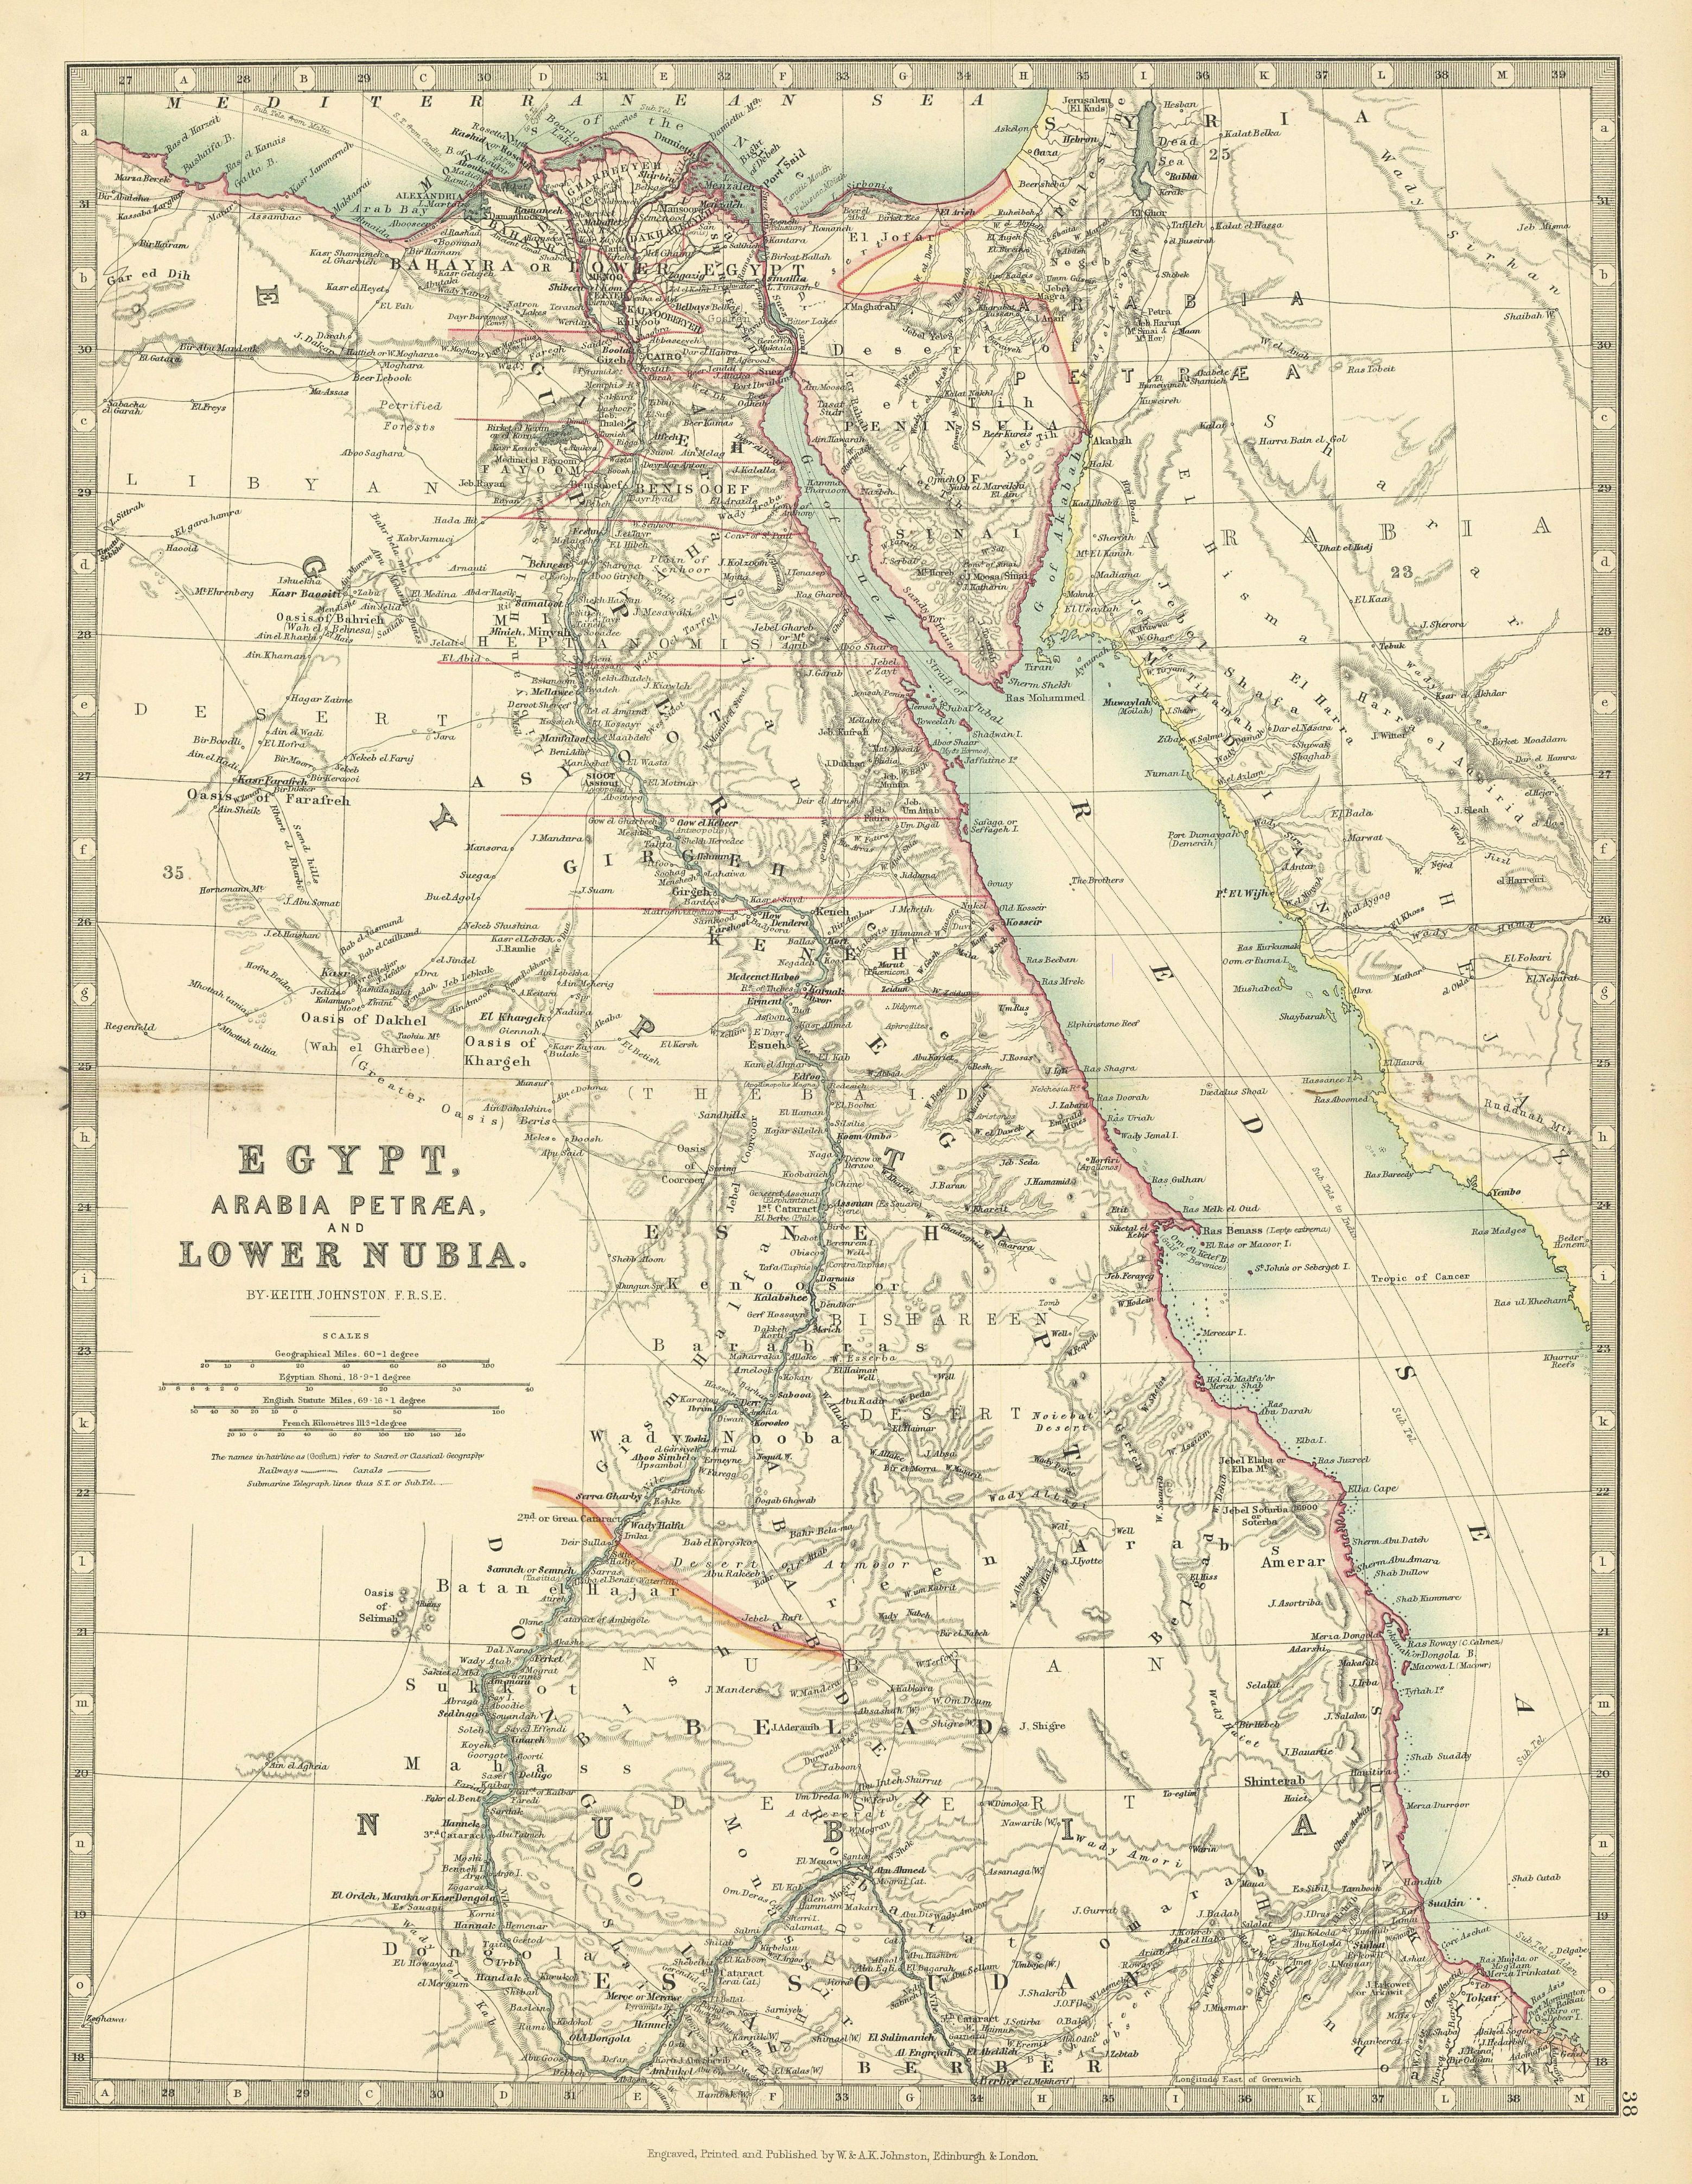 Associate Product NILE VALLEY Egypt, Arabia Petraea and Lower Nubia Divisions JOHNSTON 1897 map